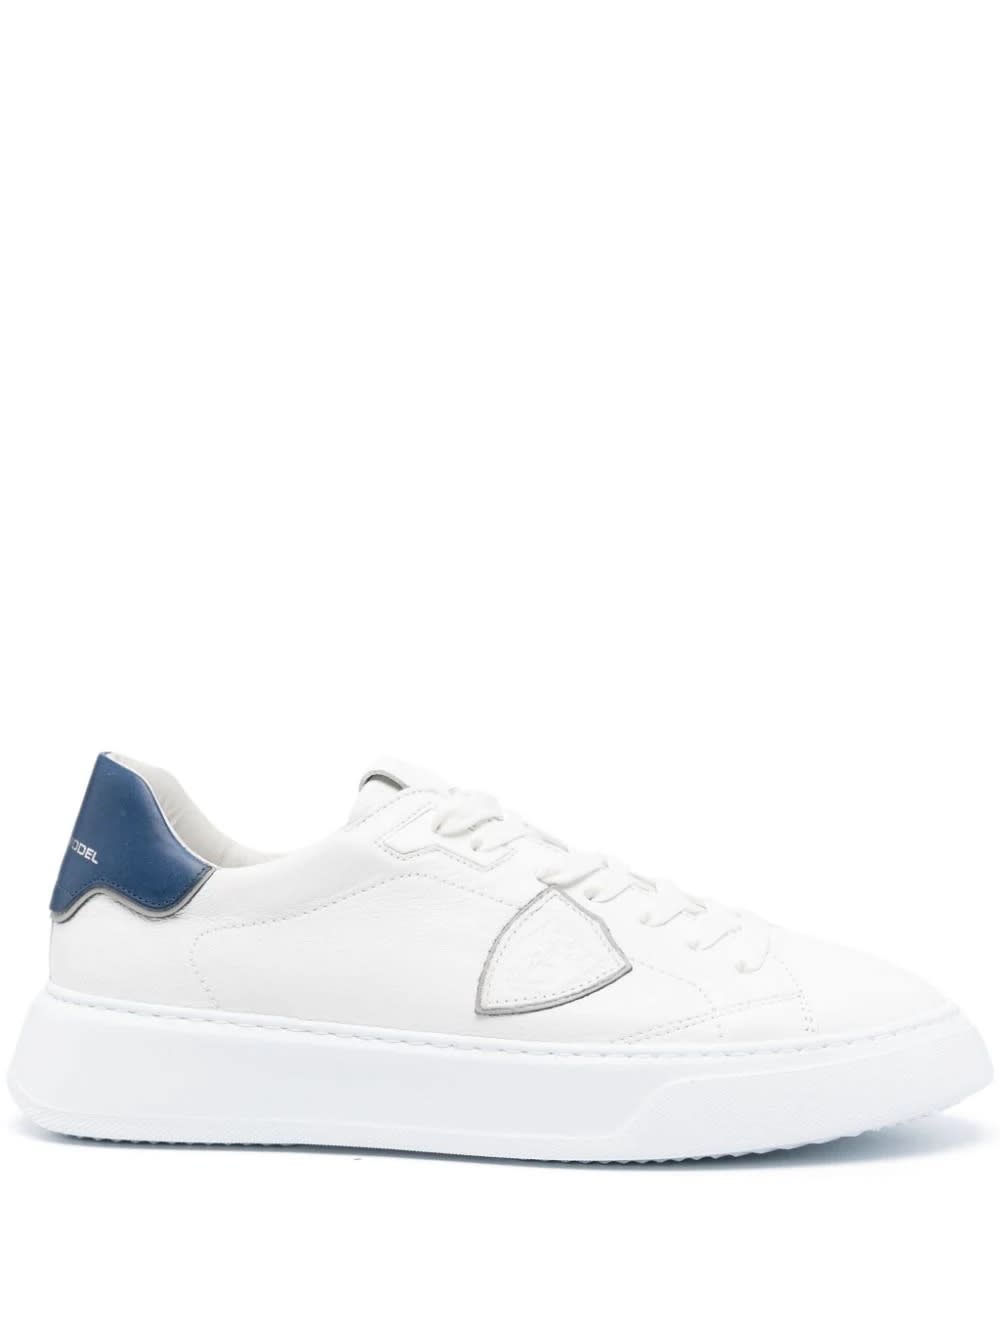 Shop Philippe Model Temple Low Sneakers - White And Blue